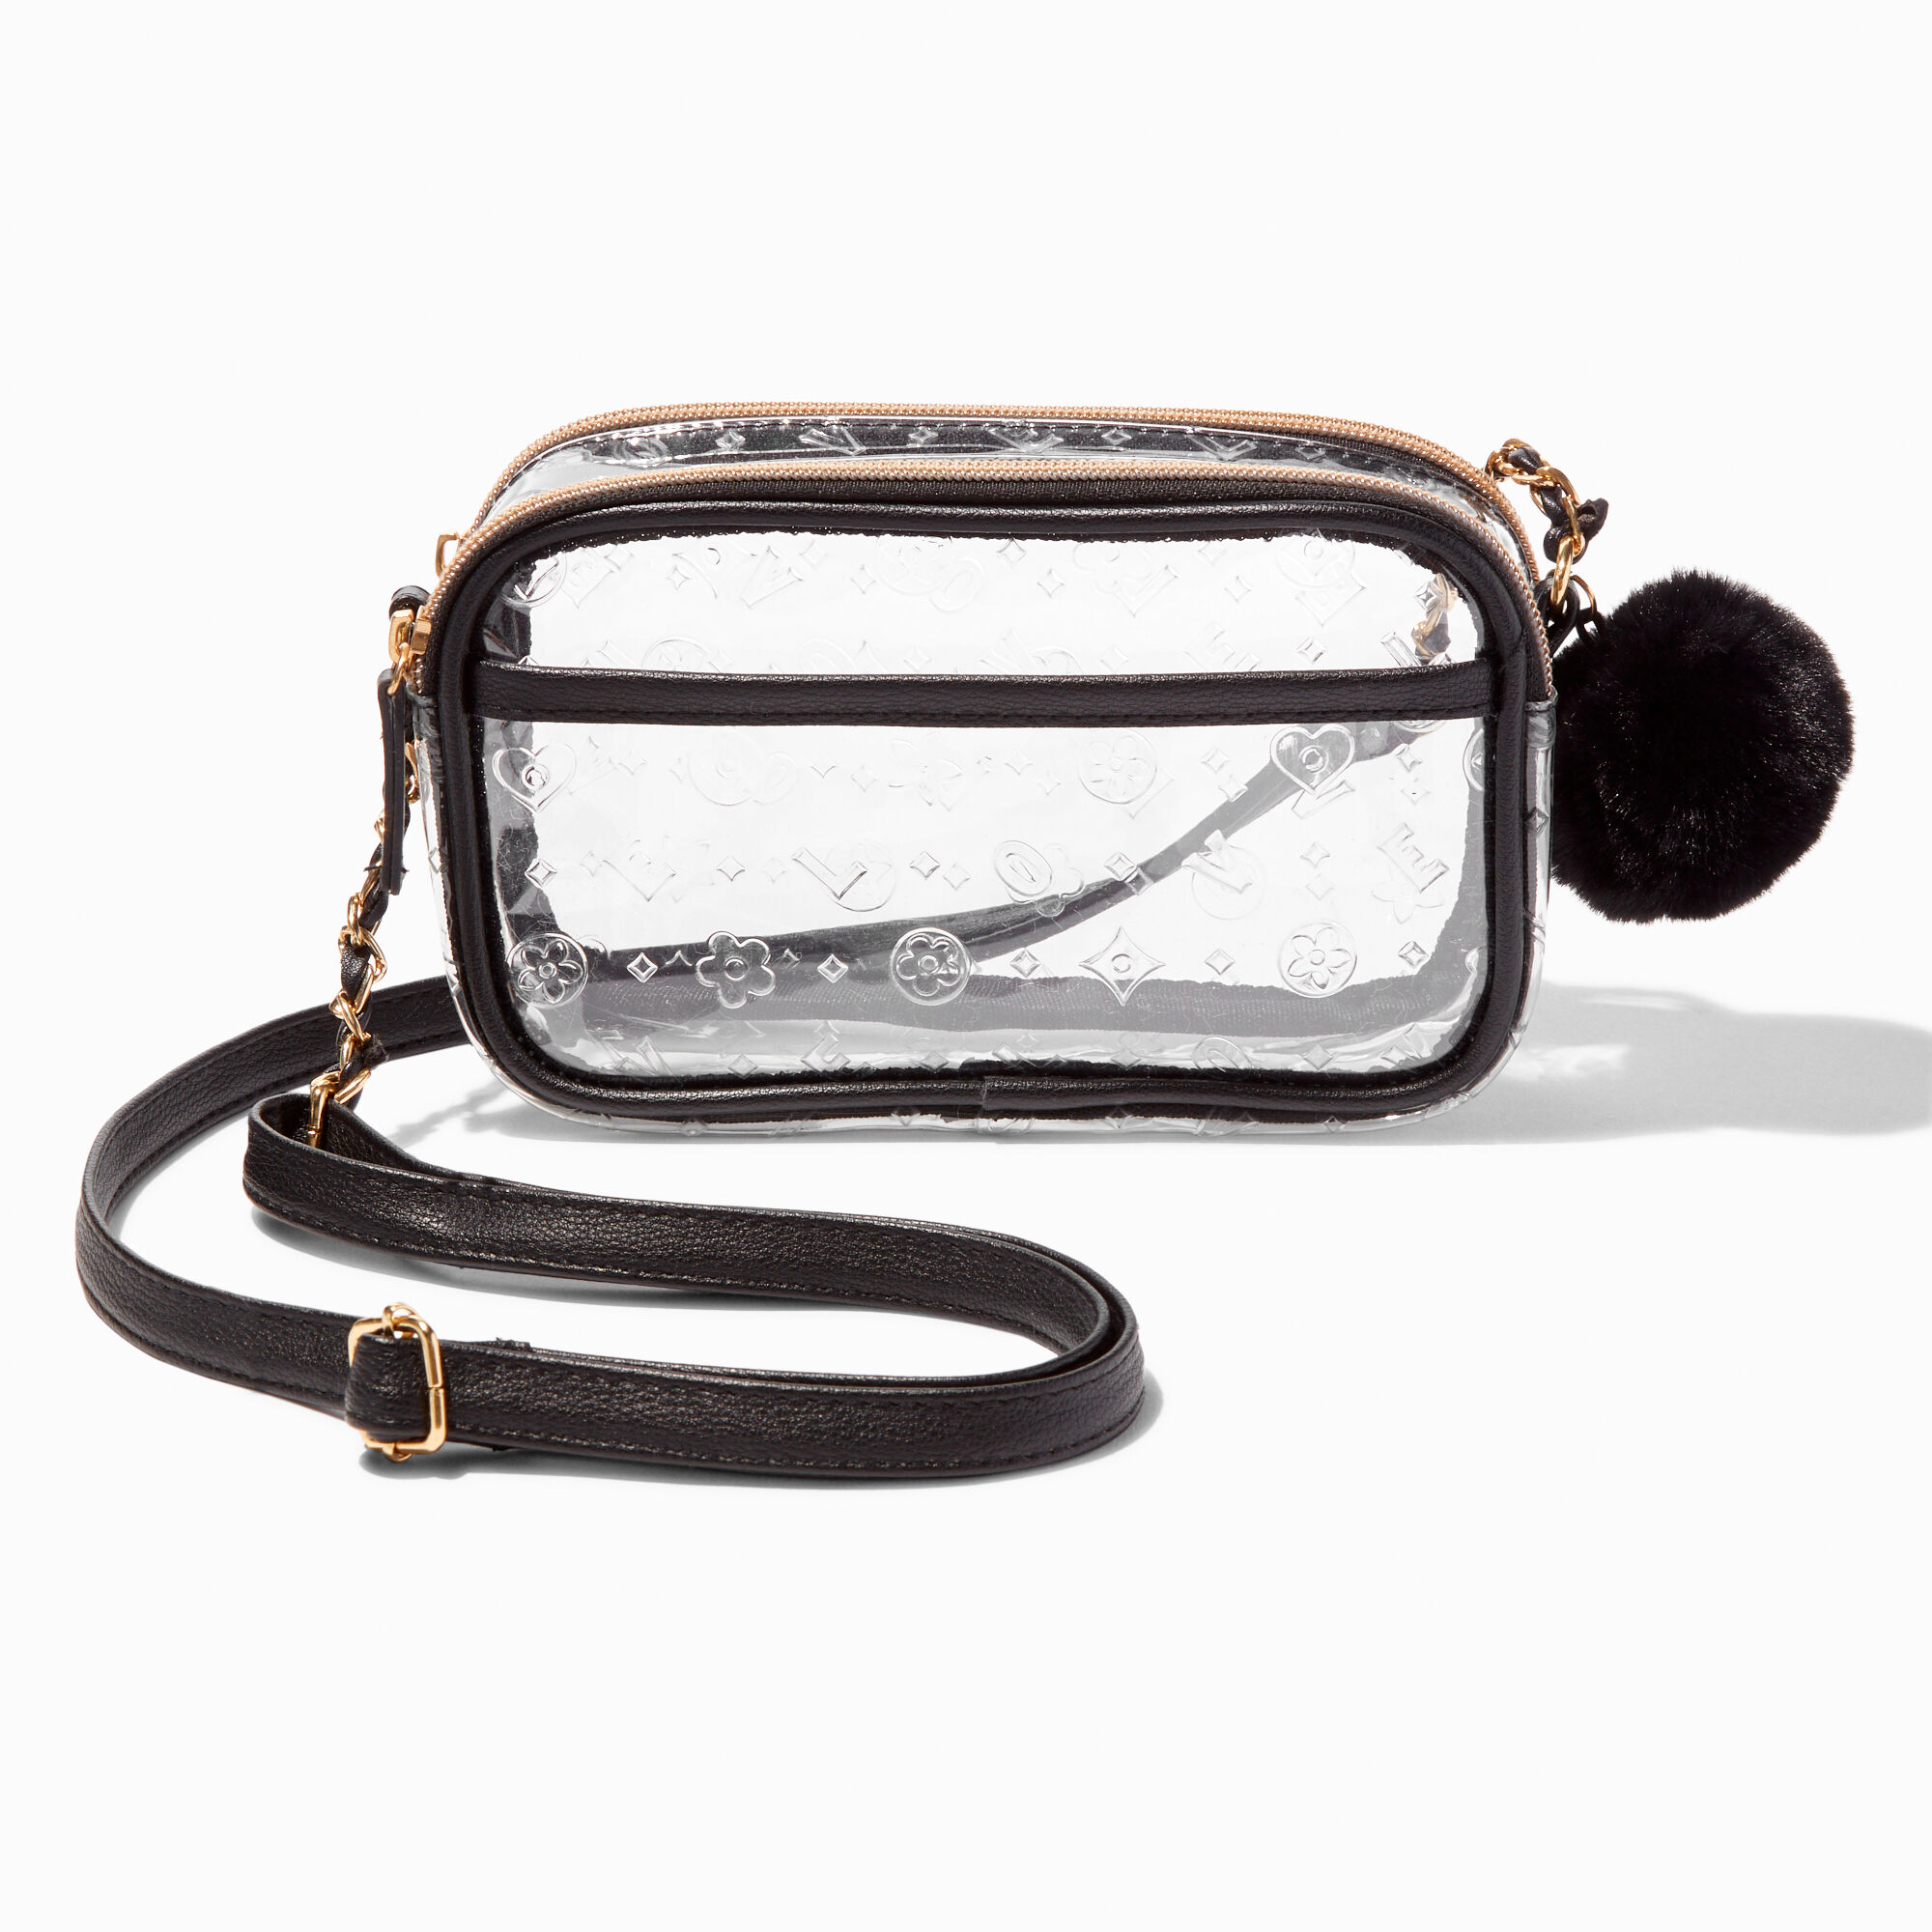 Own The Clear Bag Trend With This 40%-Off Michael Kors Crossbody | Clear  Bags Clear Tote Bag With Zipper Closure Crossbody 